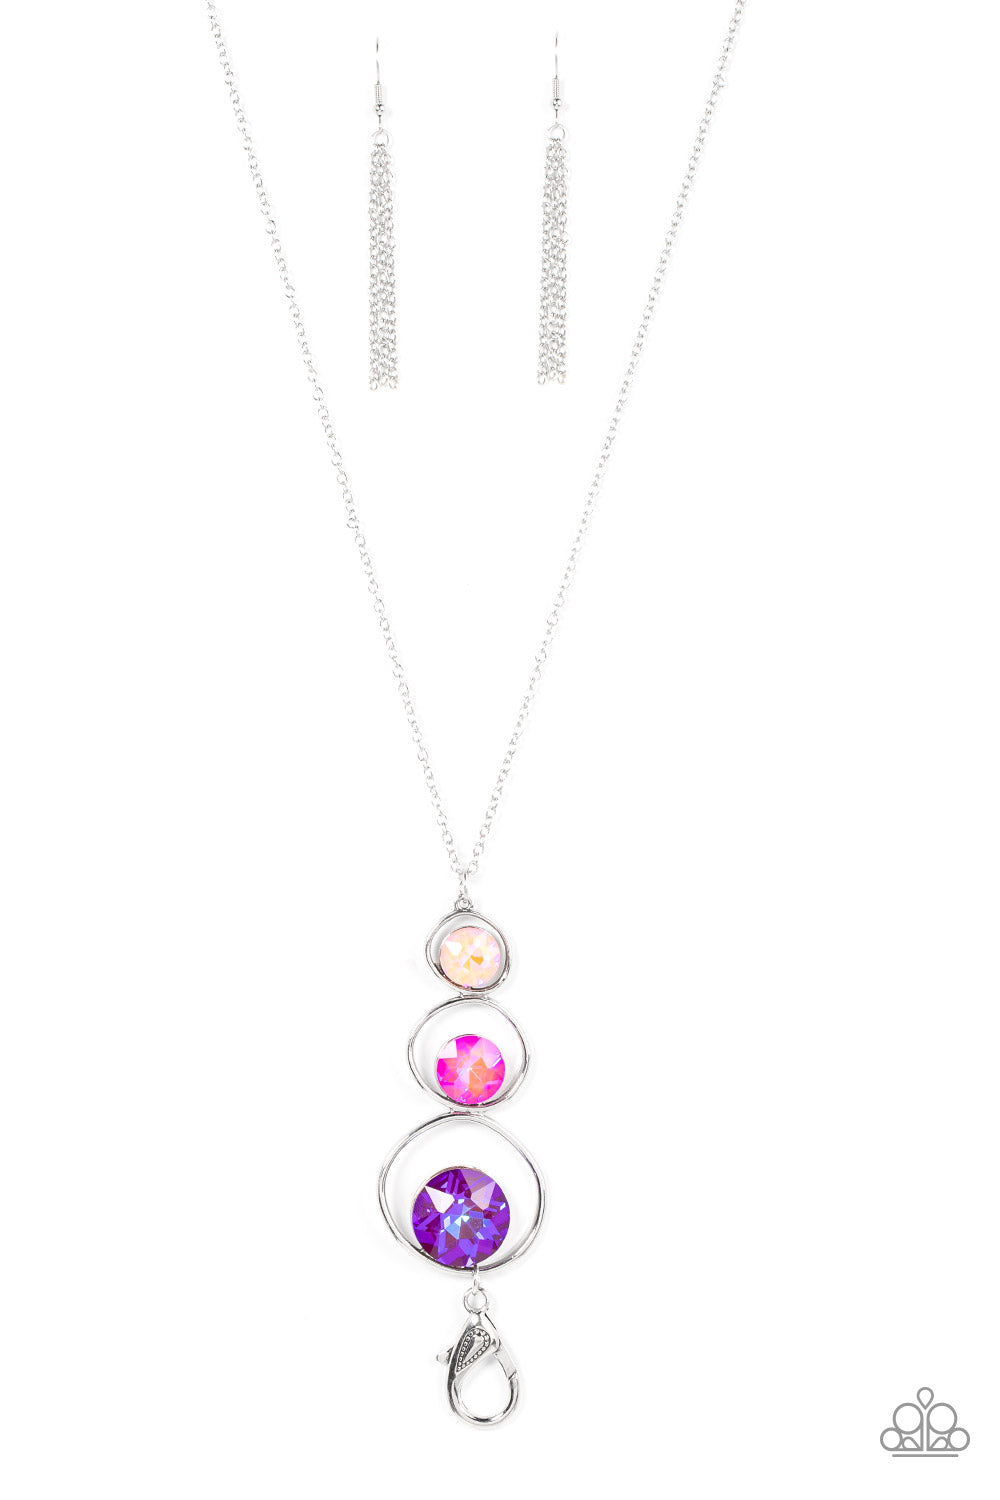 Celestial Courtier - Pink Necklace or Lanyard - Paparazzi Accessories